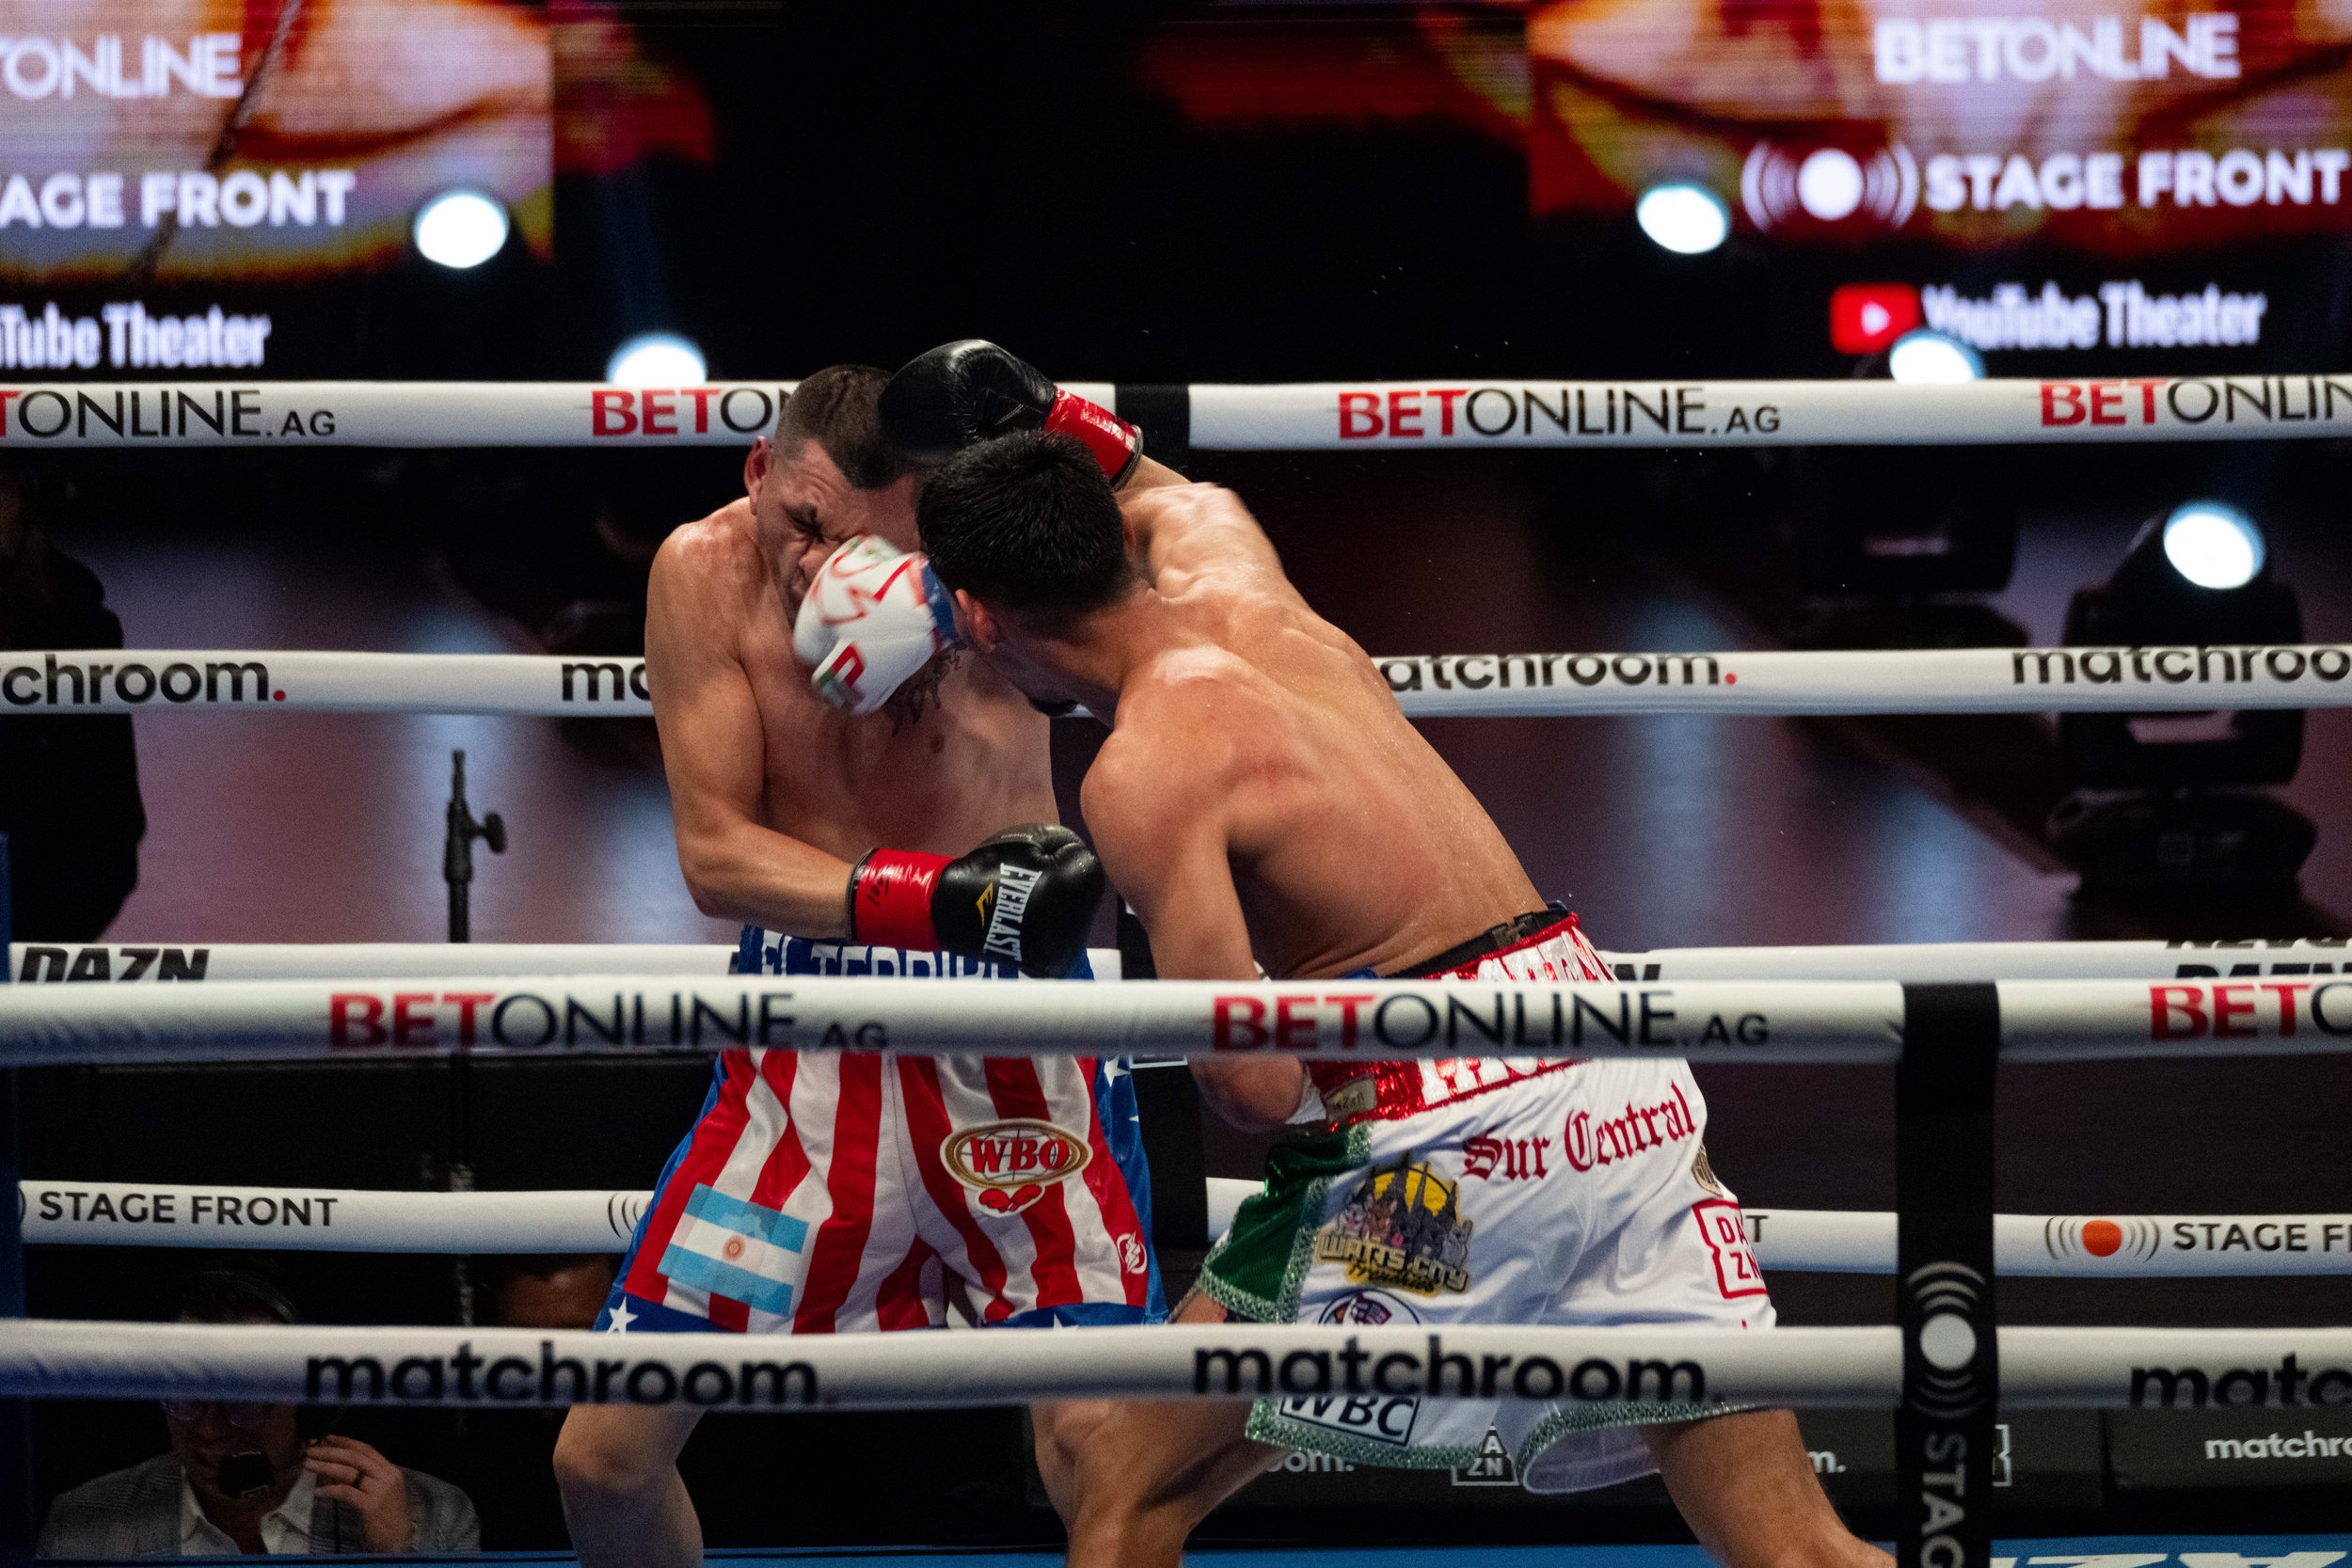  Diego Pacheco(R) landing a hit on Marcelo Coceres’s face during their battle for the WBO International and USWBC Super-Bantamweight title. Pacheco came out victorious after a knockout to keep Pacheco the reigning WBO International and USWBC Super-Ba